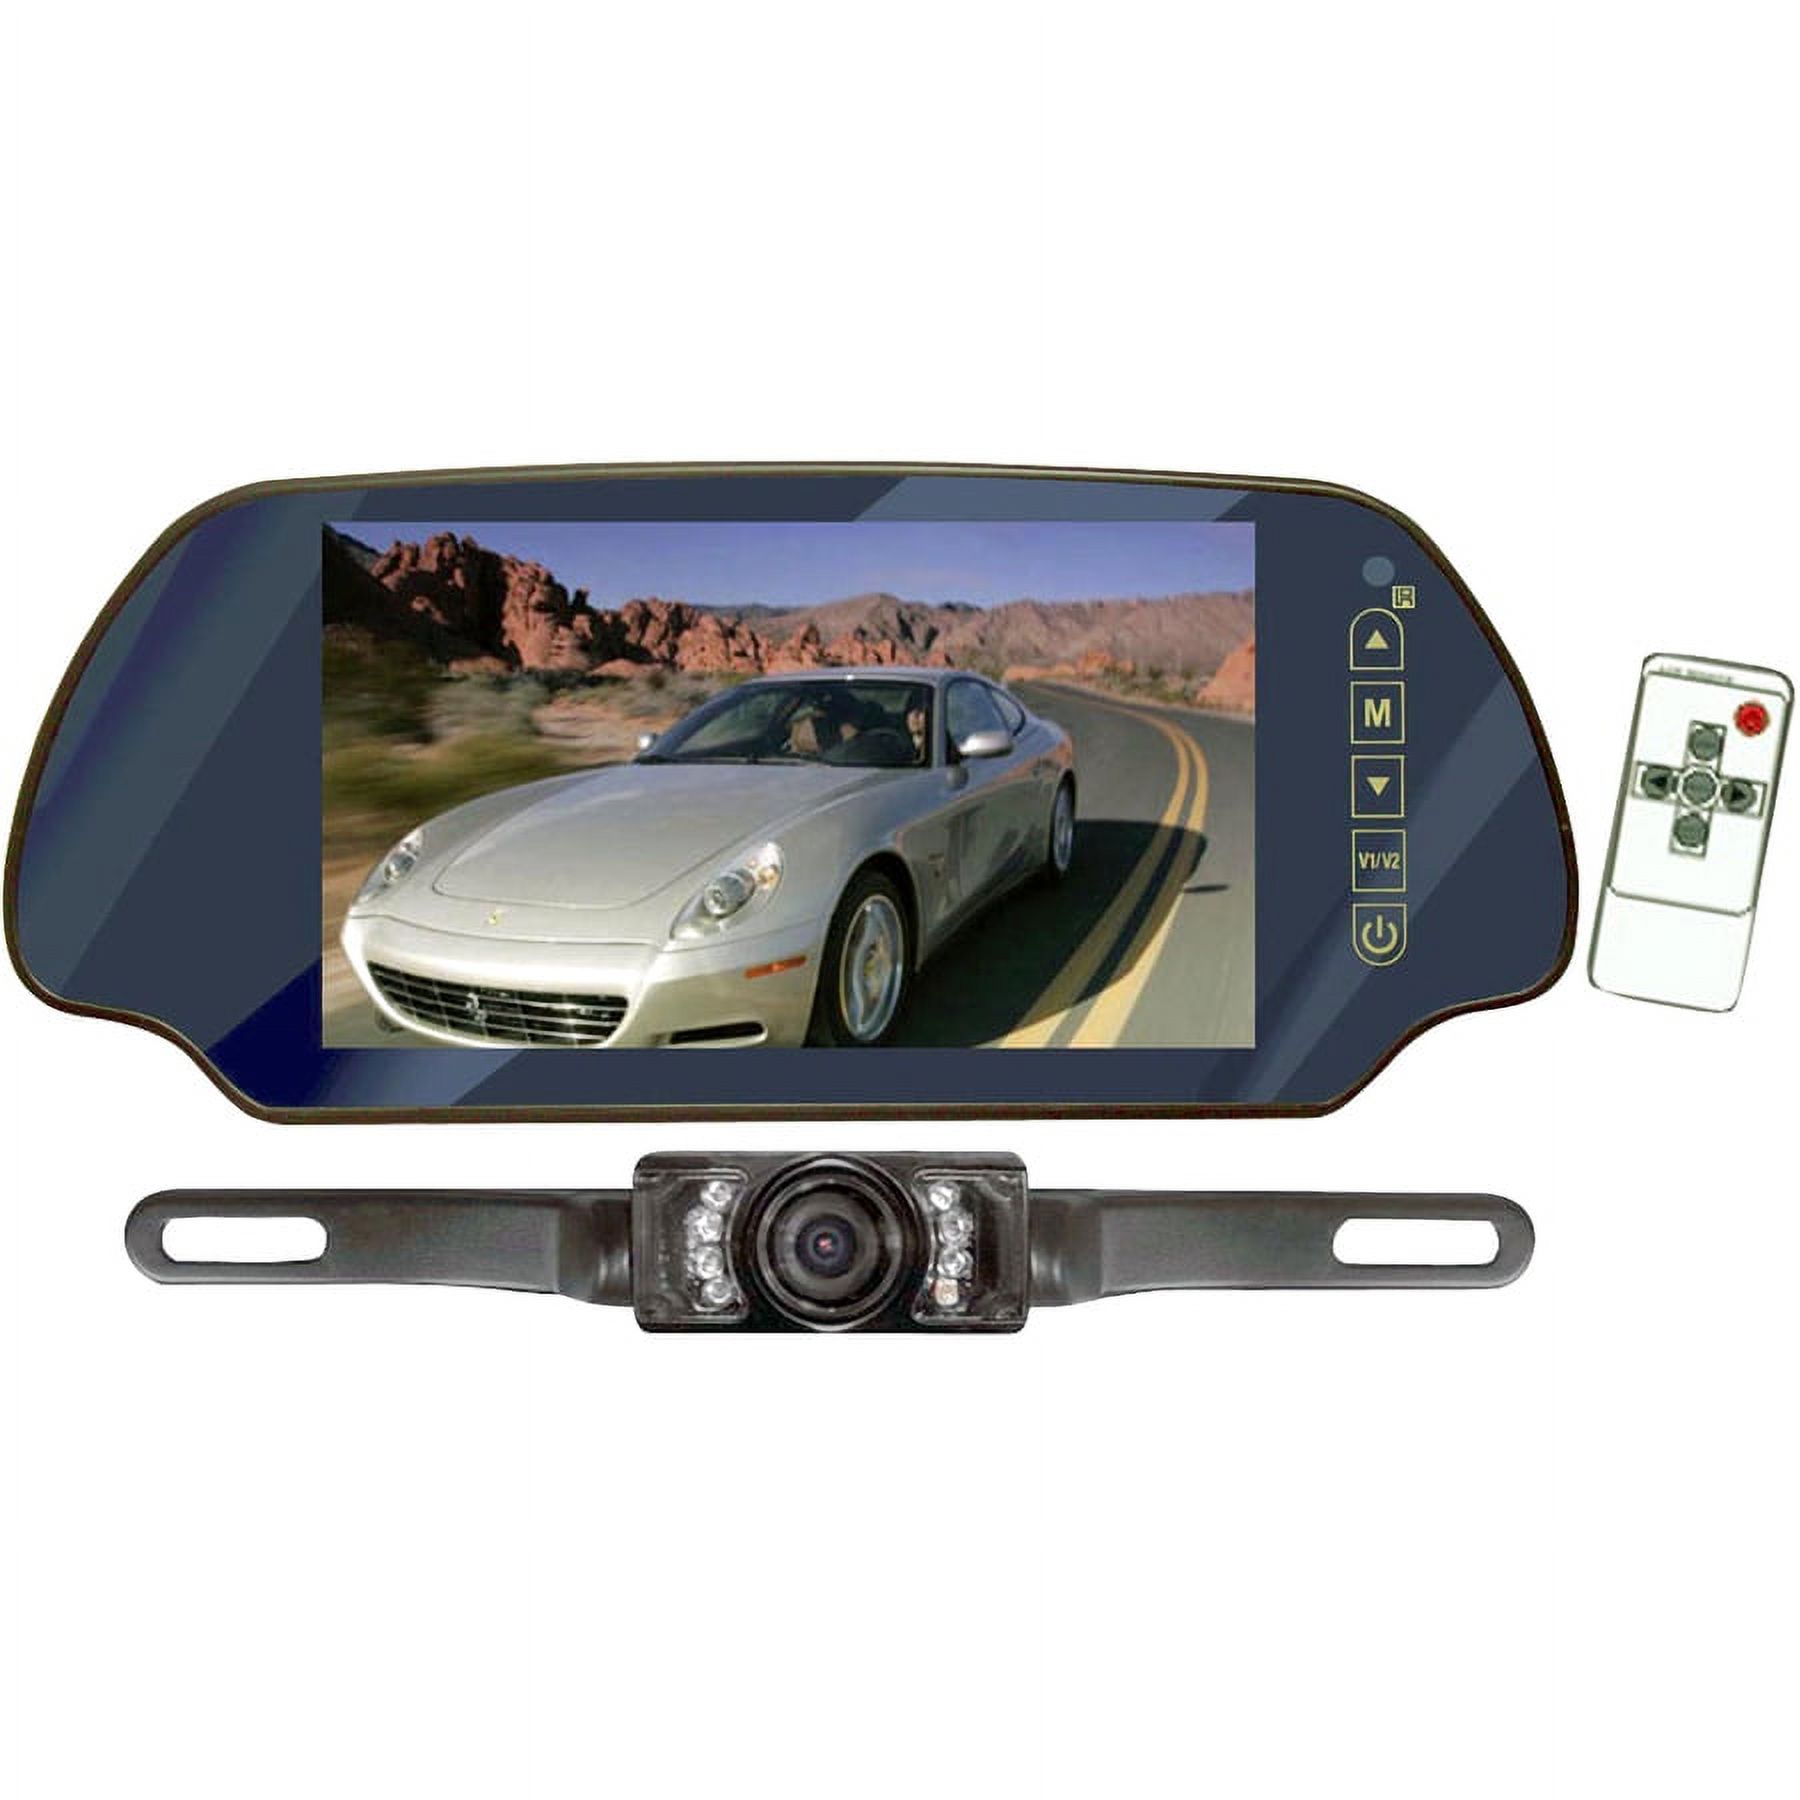 Pyle PLCM7200 7 Inch Rearview Mirror Monitor Screen Backup Camera w/Night Vision - image 2 of 2